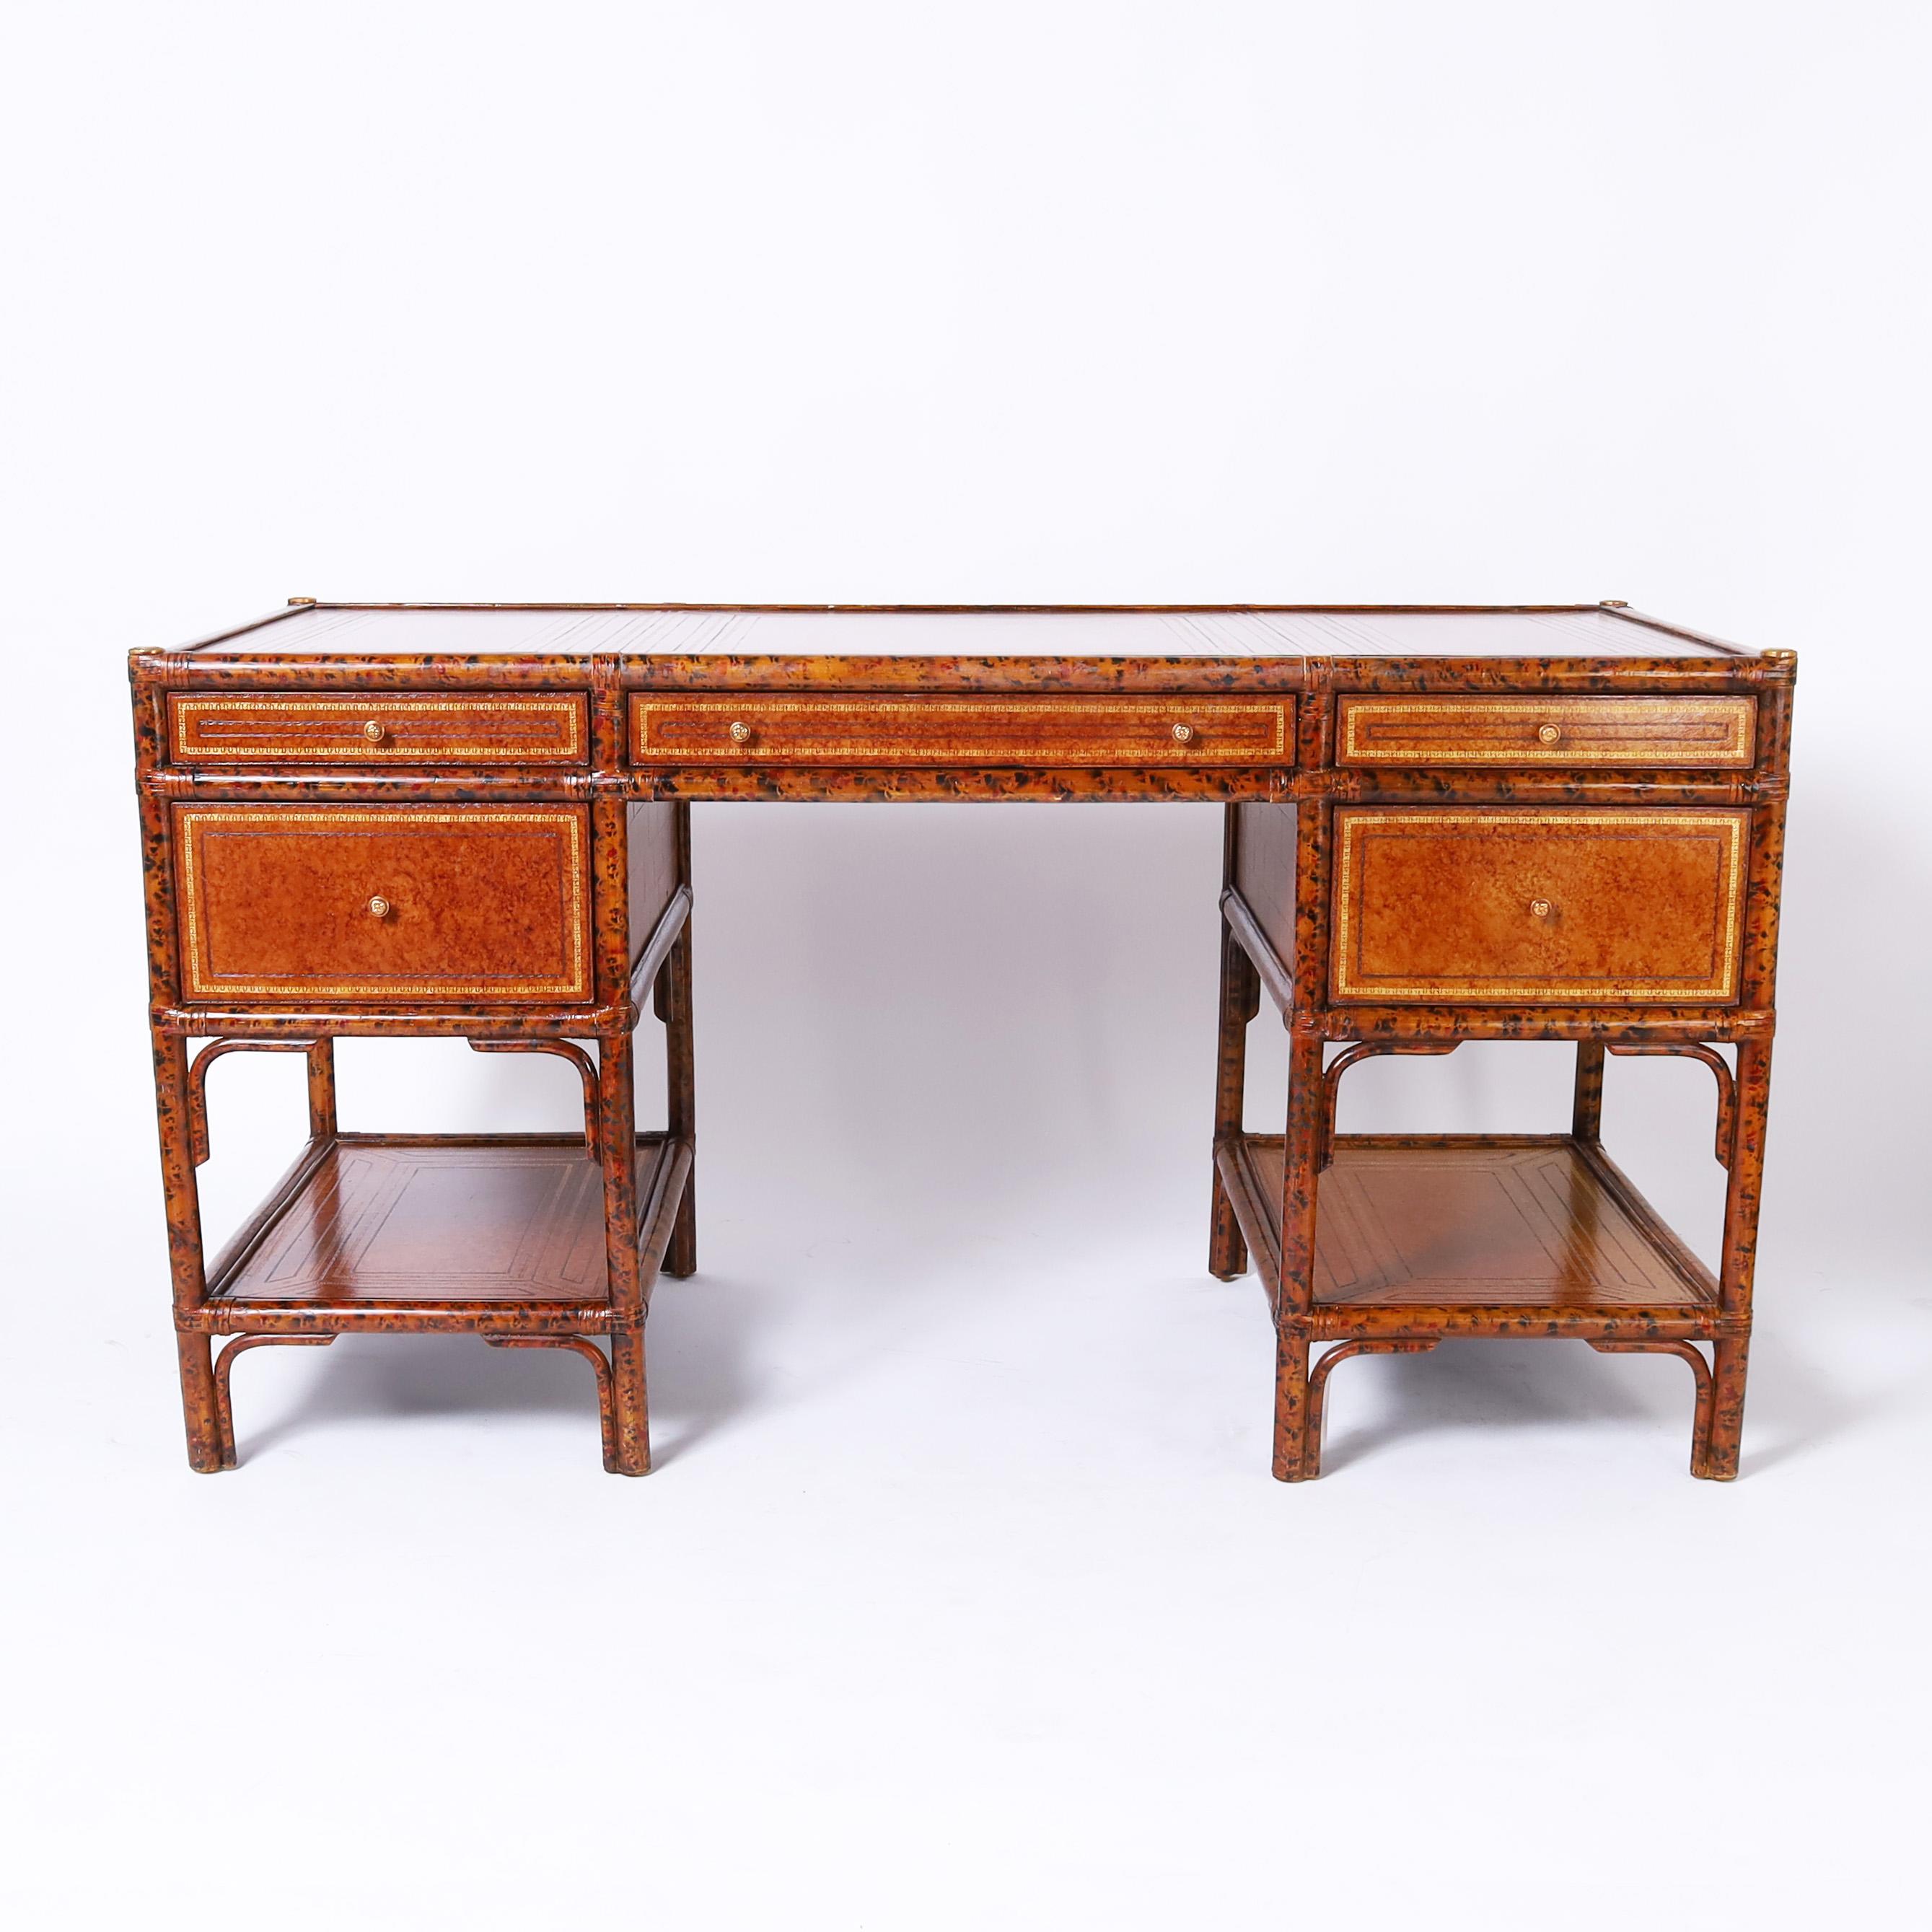 Impressive Mid Century desk crafted with a faux bamboo frame having a faux tortoise finish featuring tooled leather panels on the top, front, side and back, lower tier storage and bent wood brackets. Signed Maitland-Smith in a drawer.